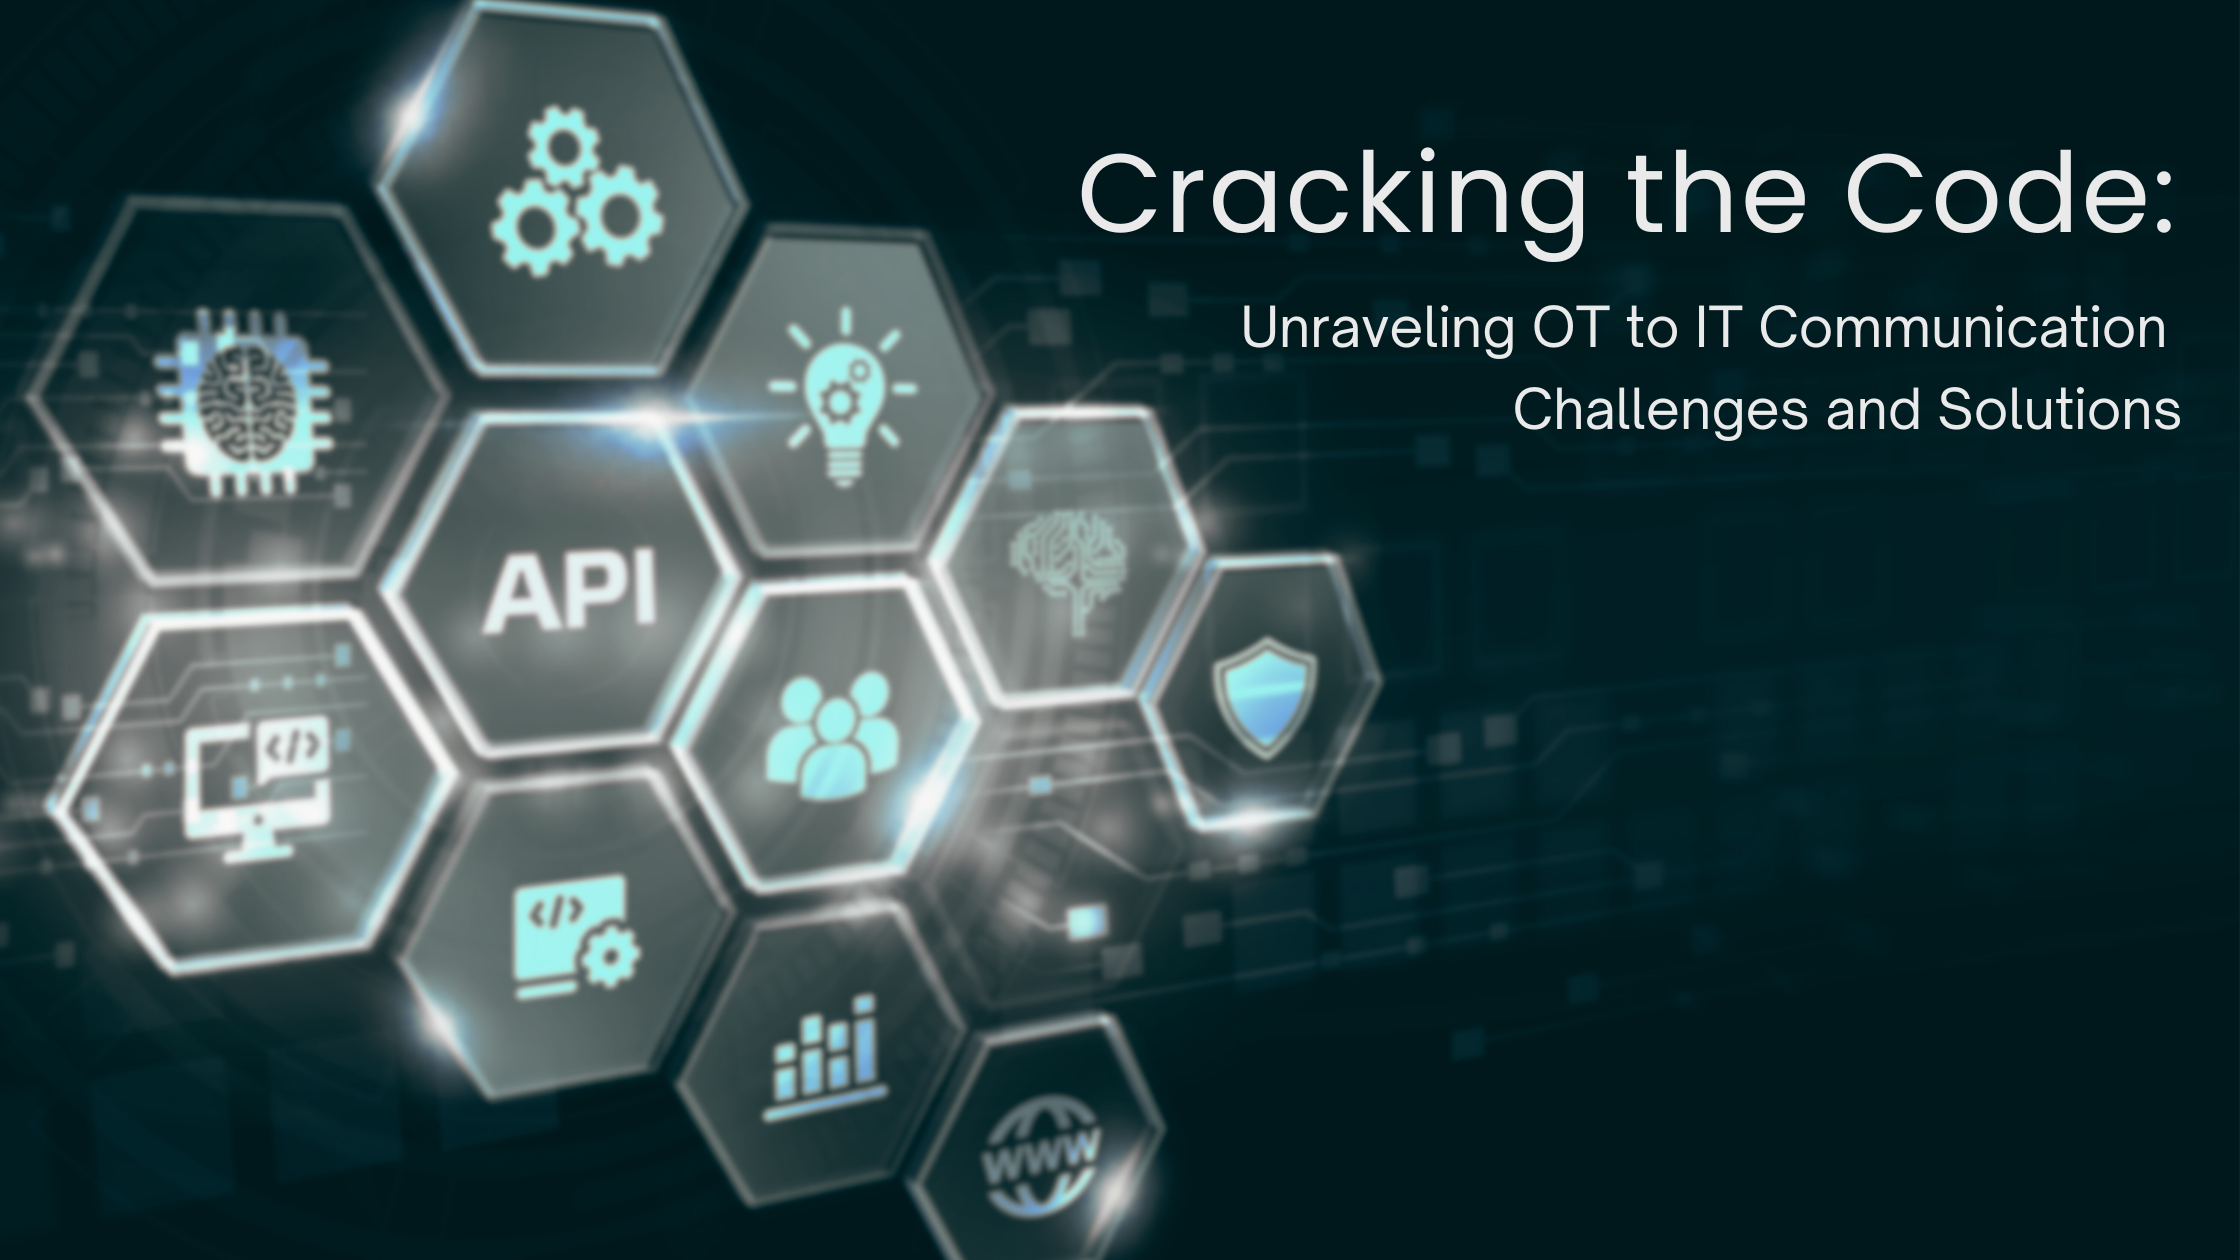 Cracking the Code: Unraveling OT to IT Communication Challenges and Solutions